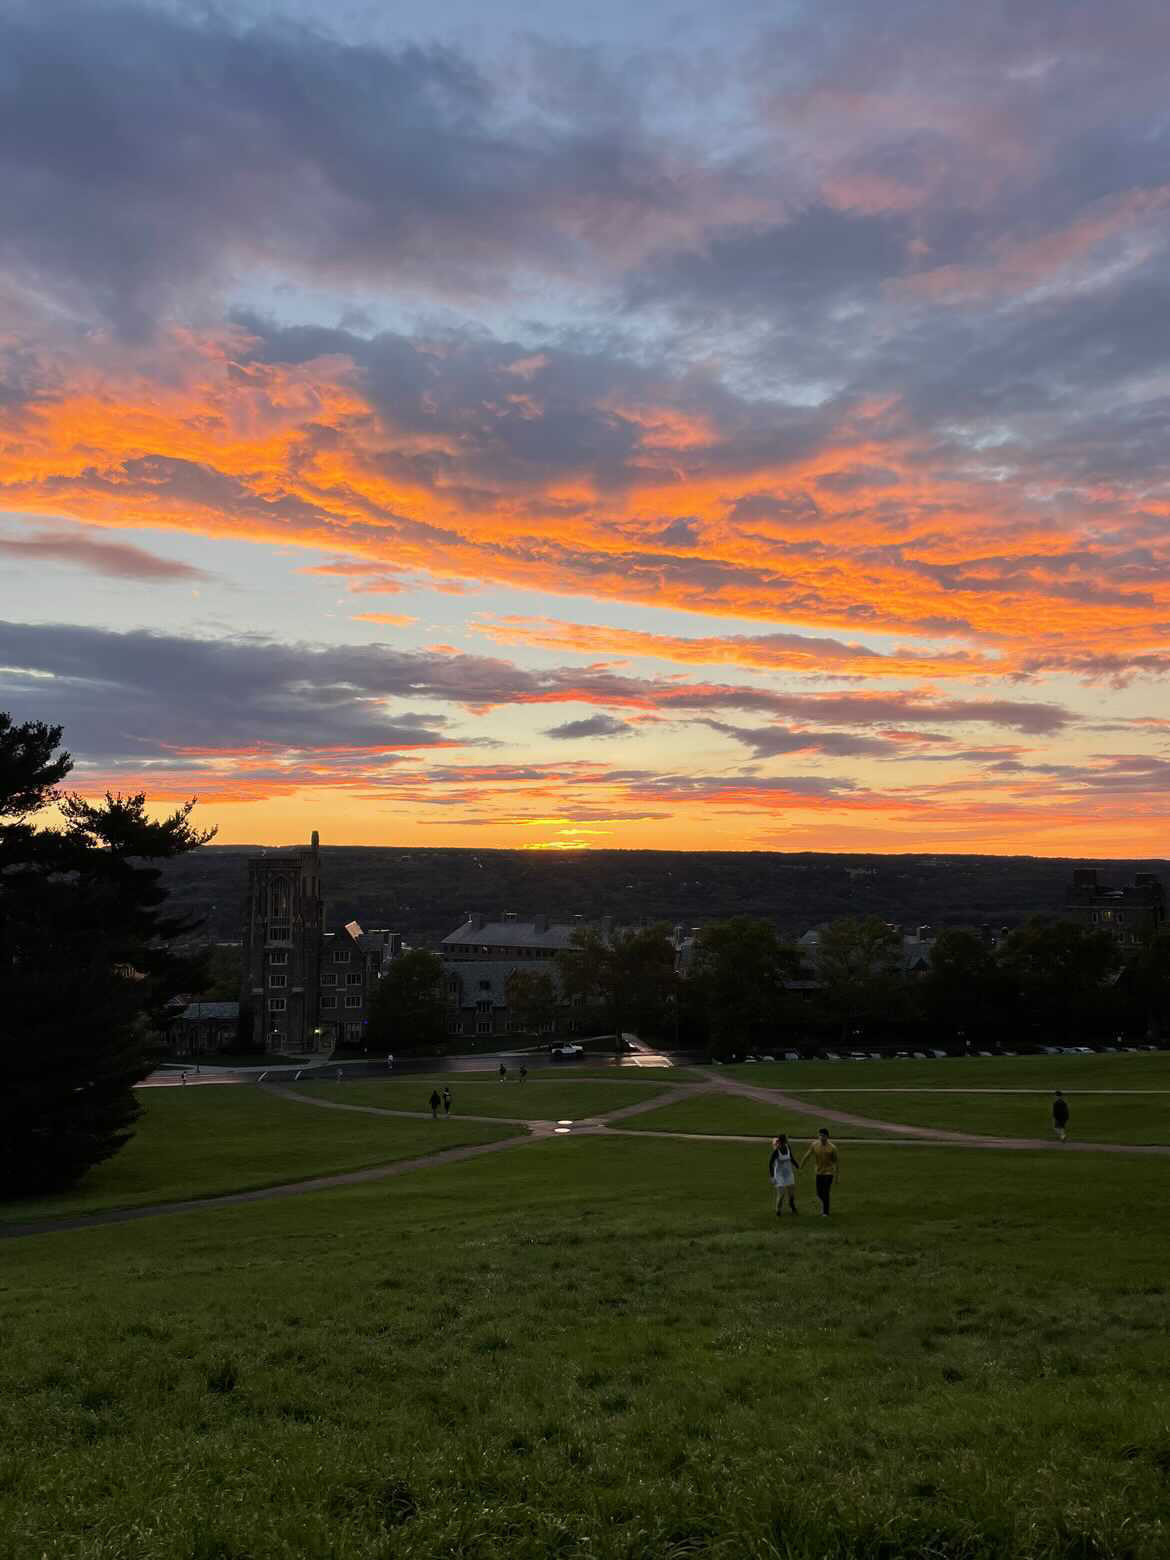 A cloudy orange-and-gray sunset over Libe Slope at Cornell University.